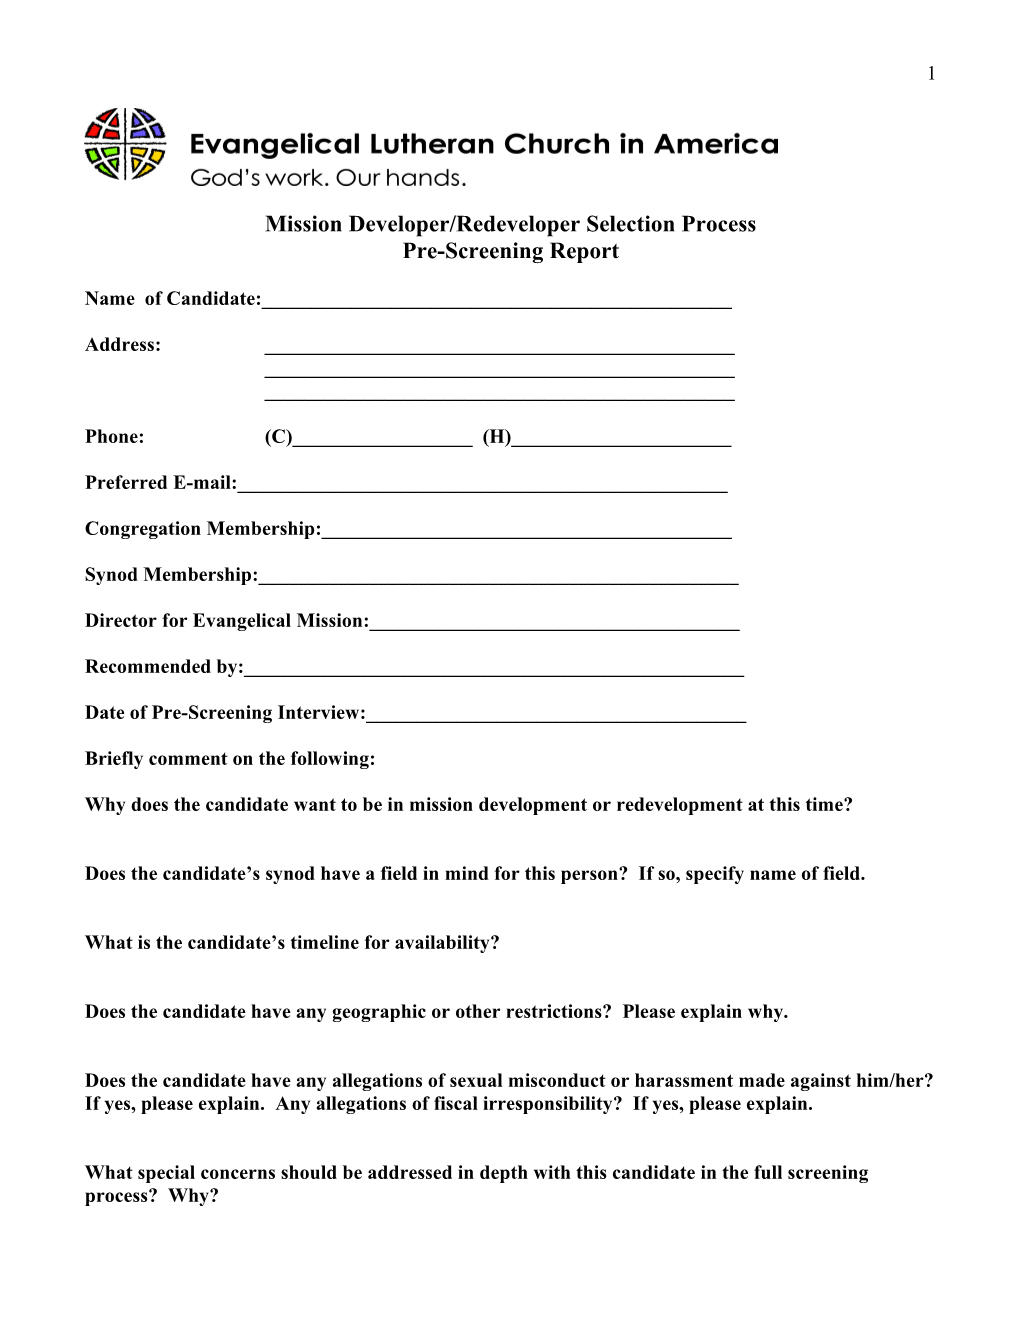 Pre-Screening Form for the Behavioral Interview Process